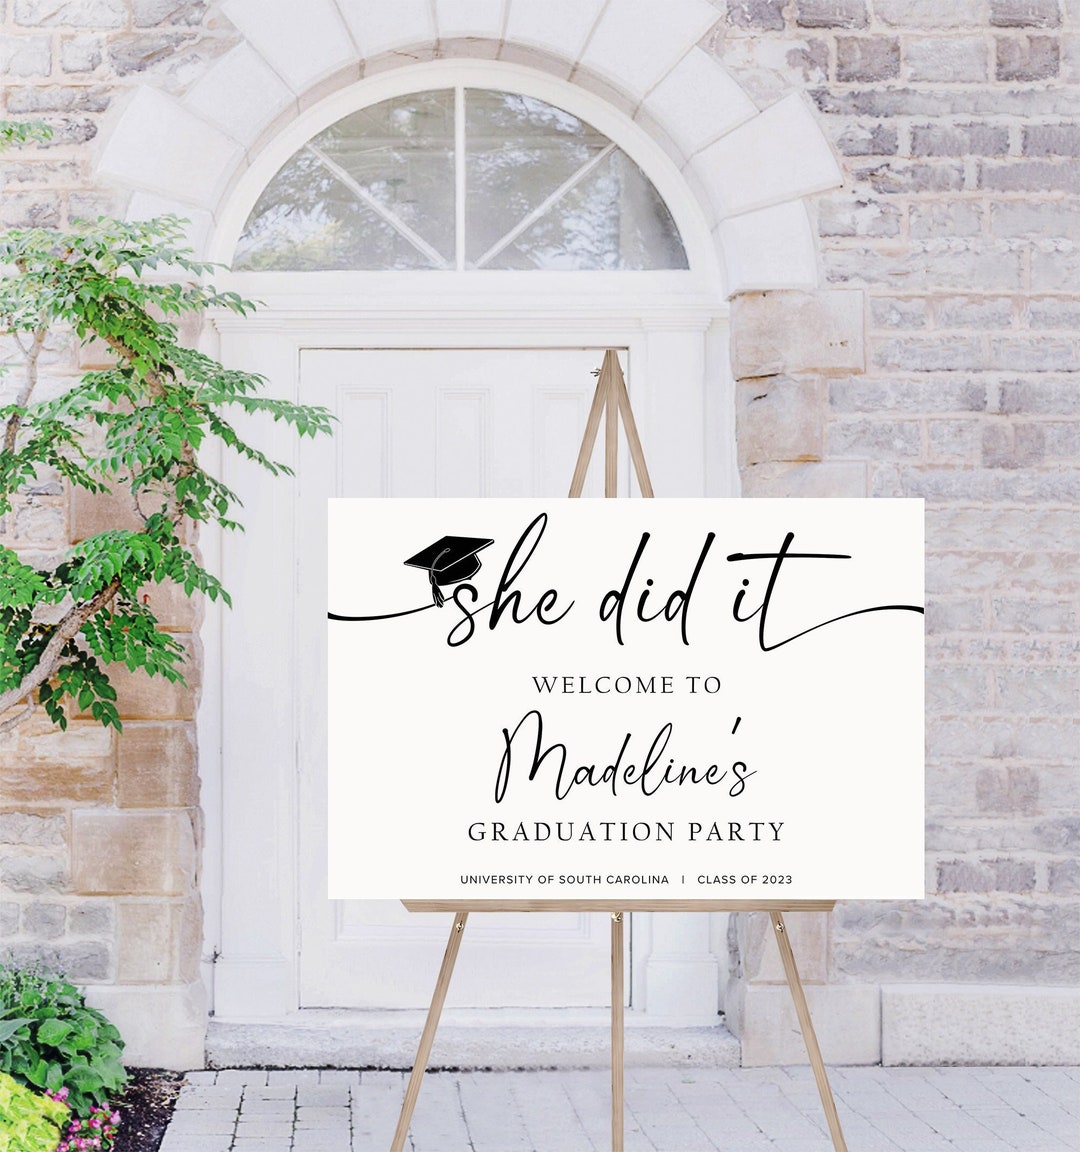 She Did It Graduation Party Welcome Sign Graduation Party Decorations